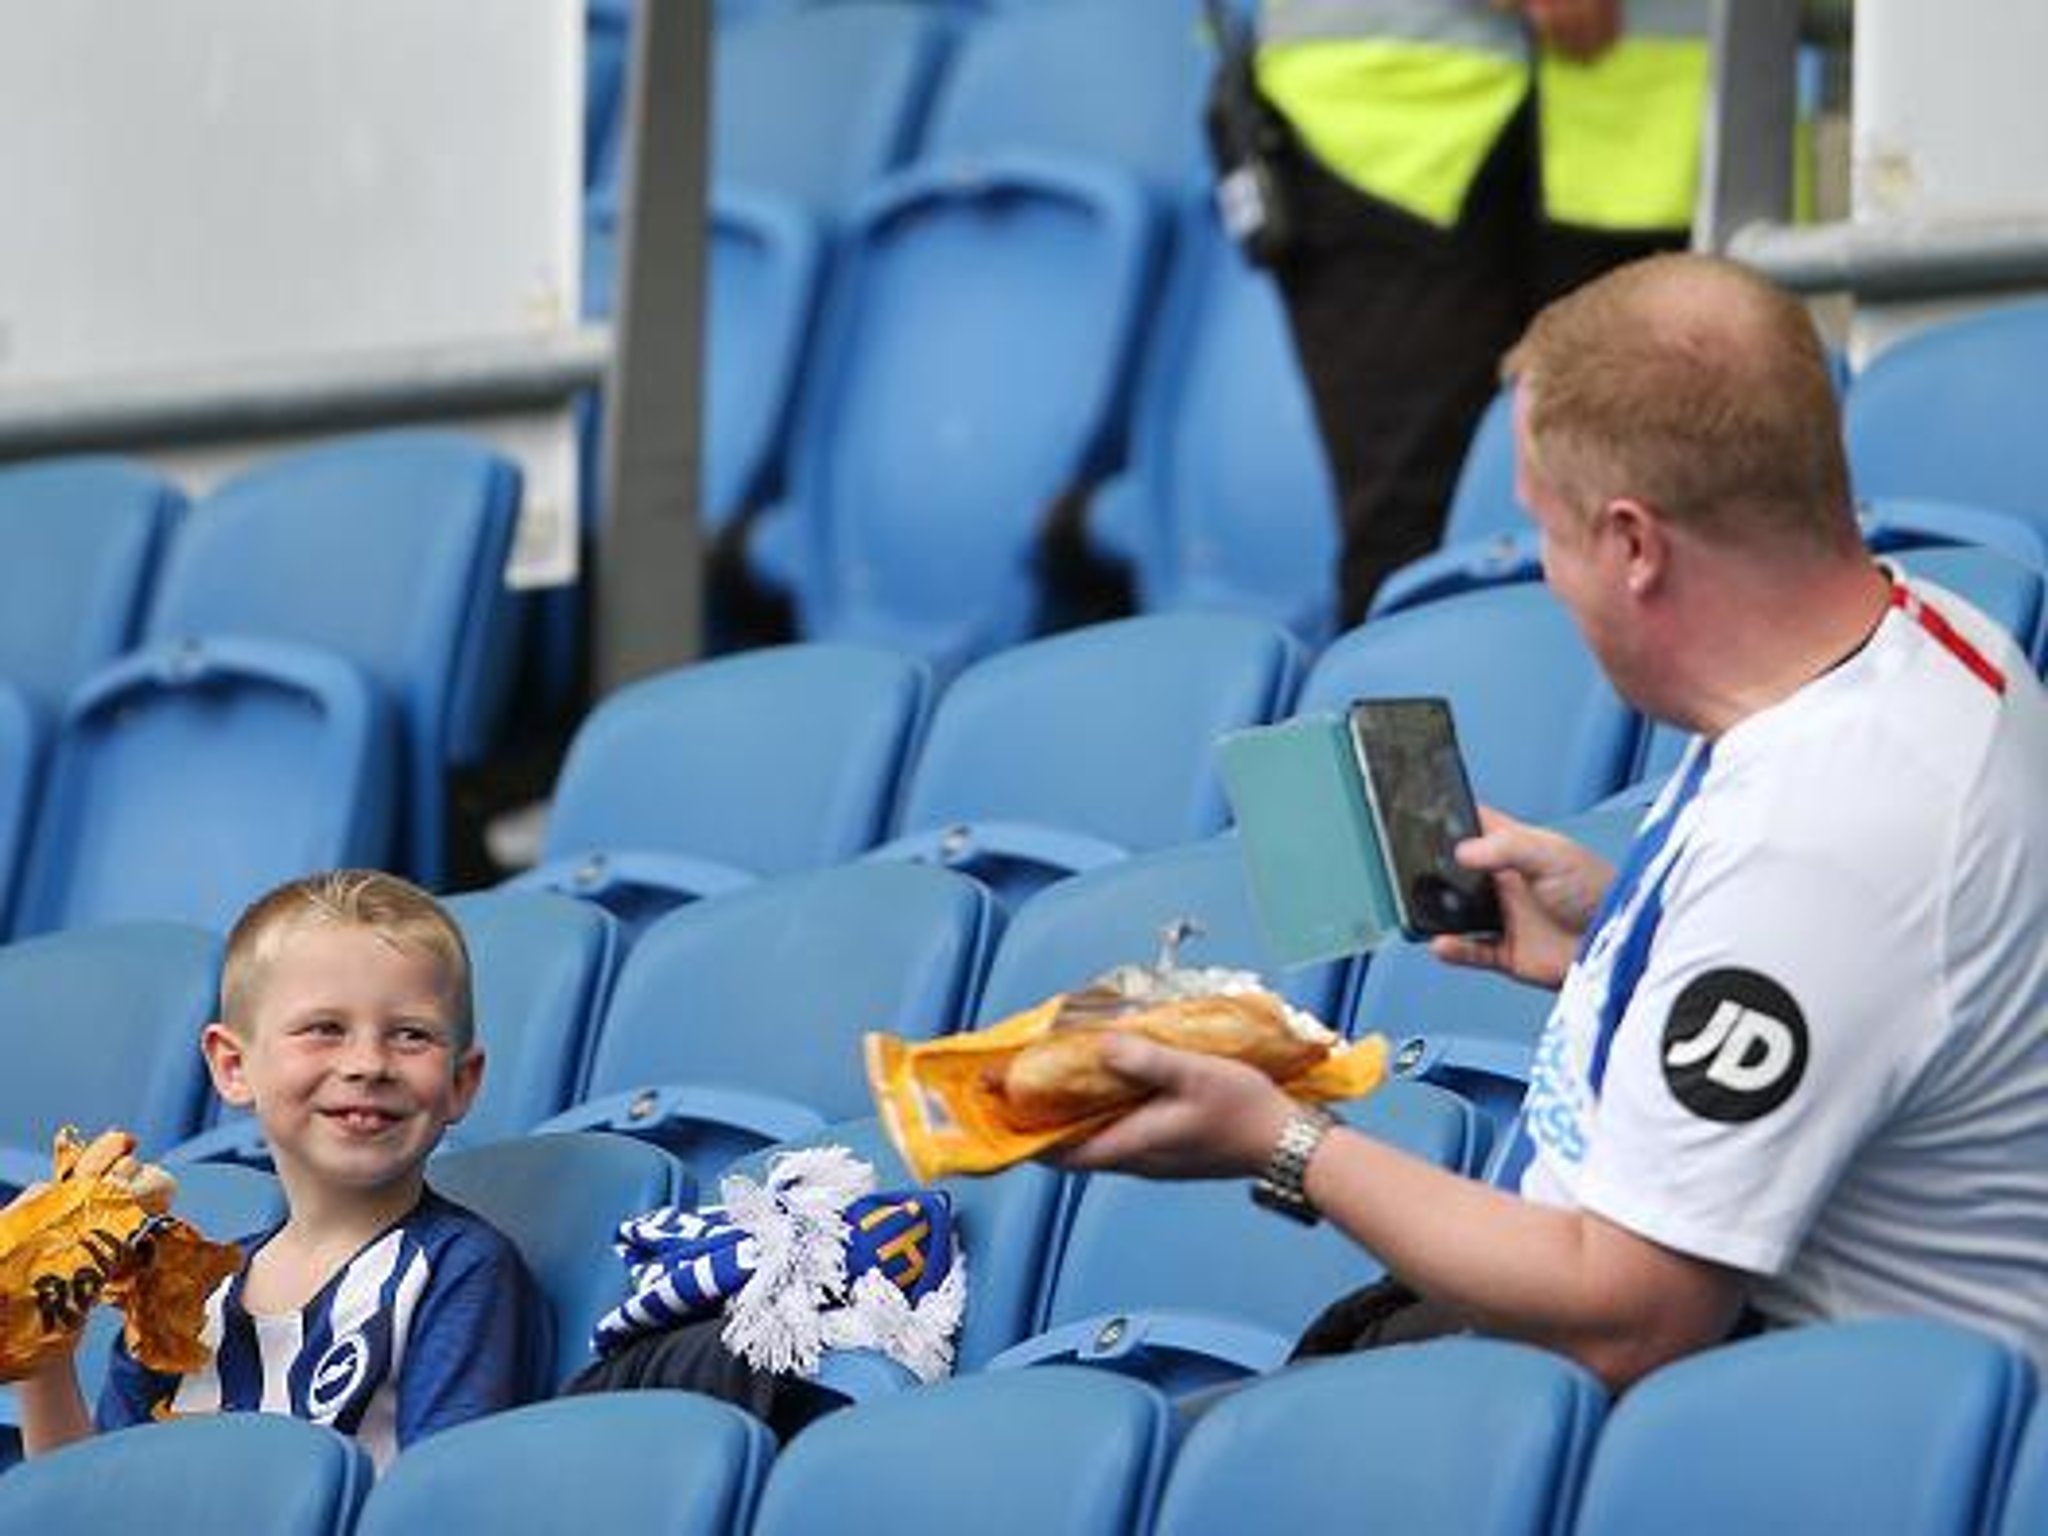 Brighton fans young and old